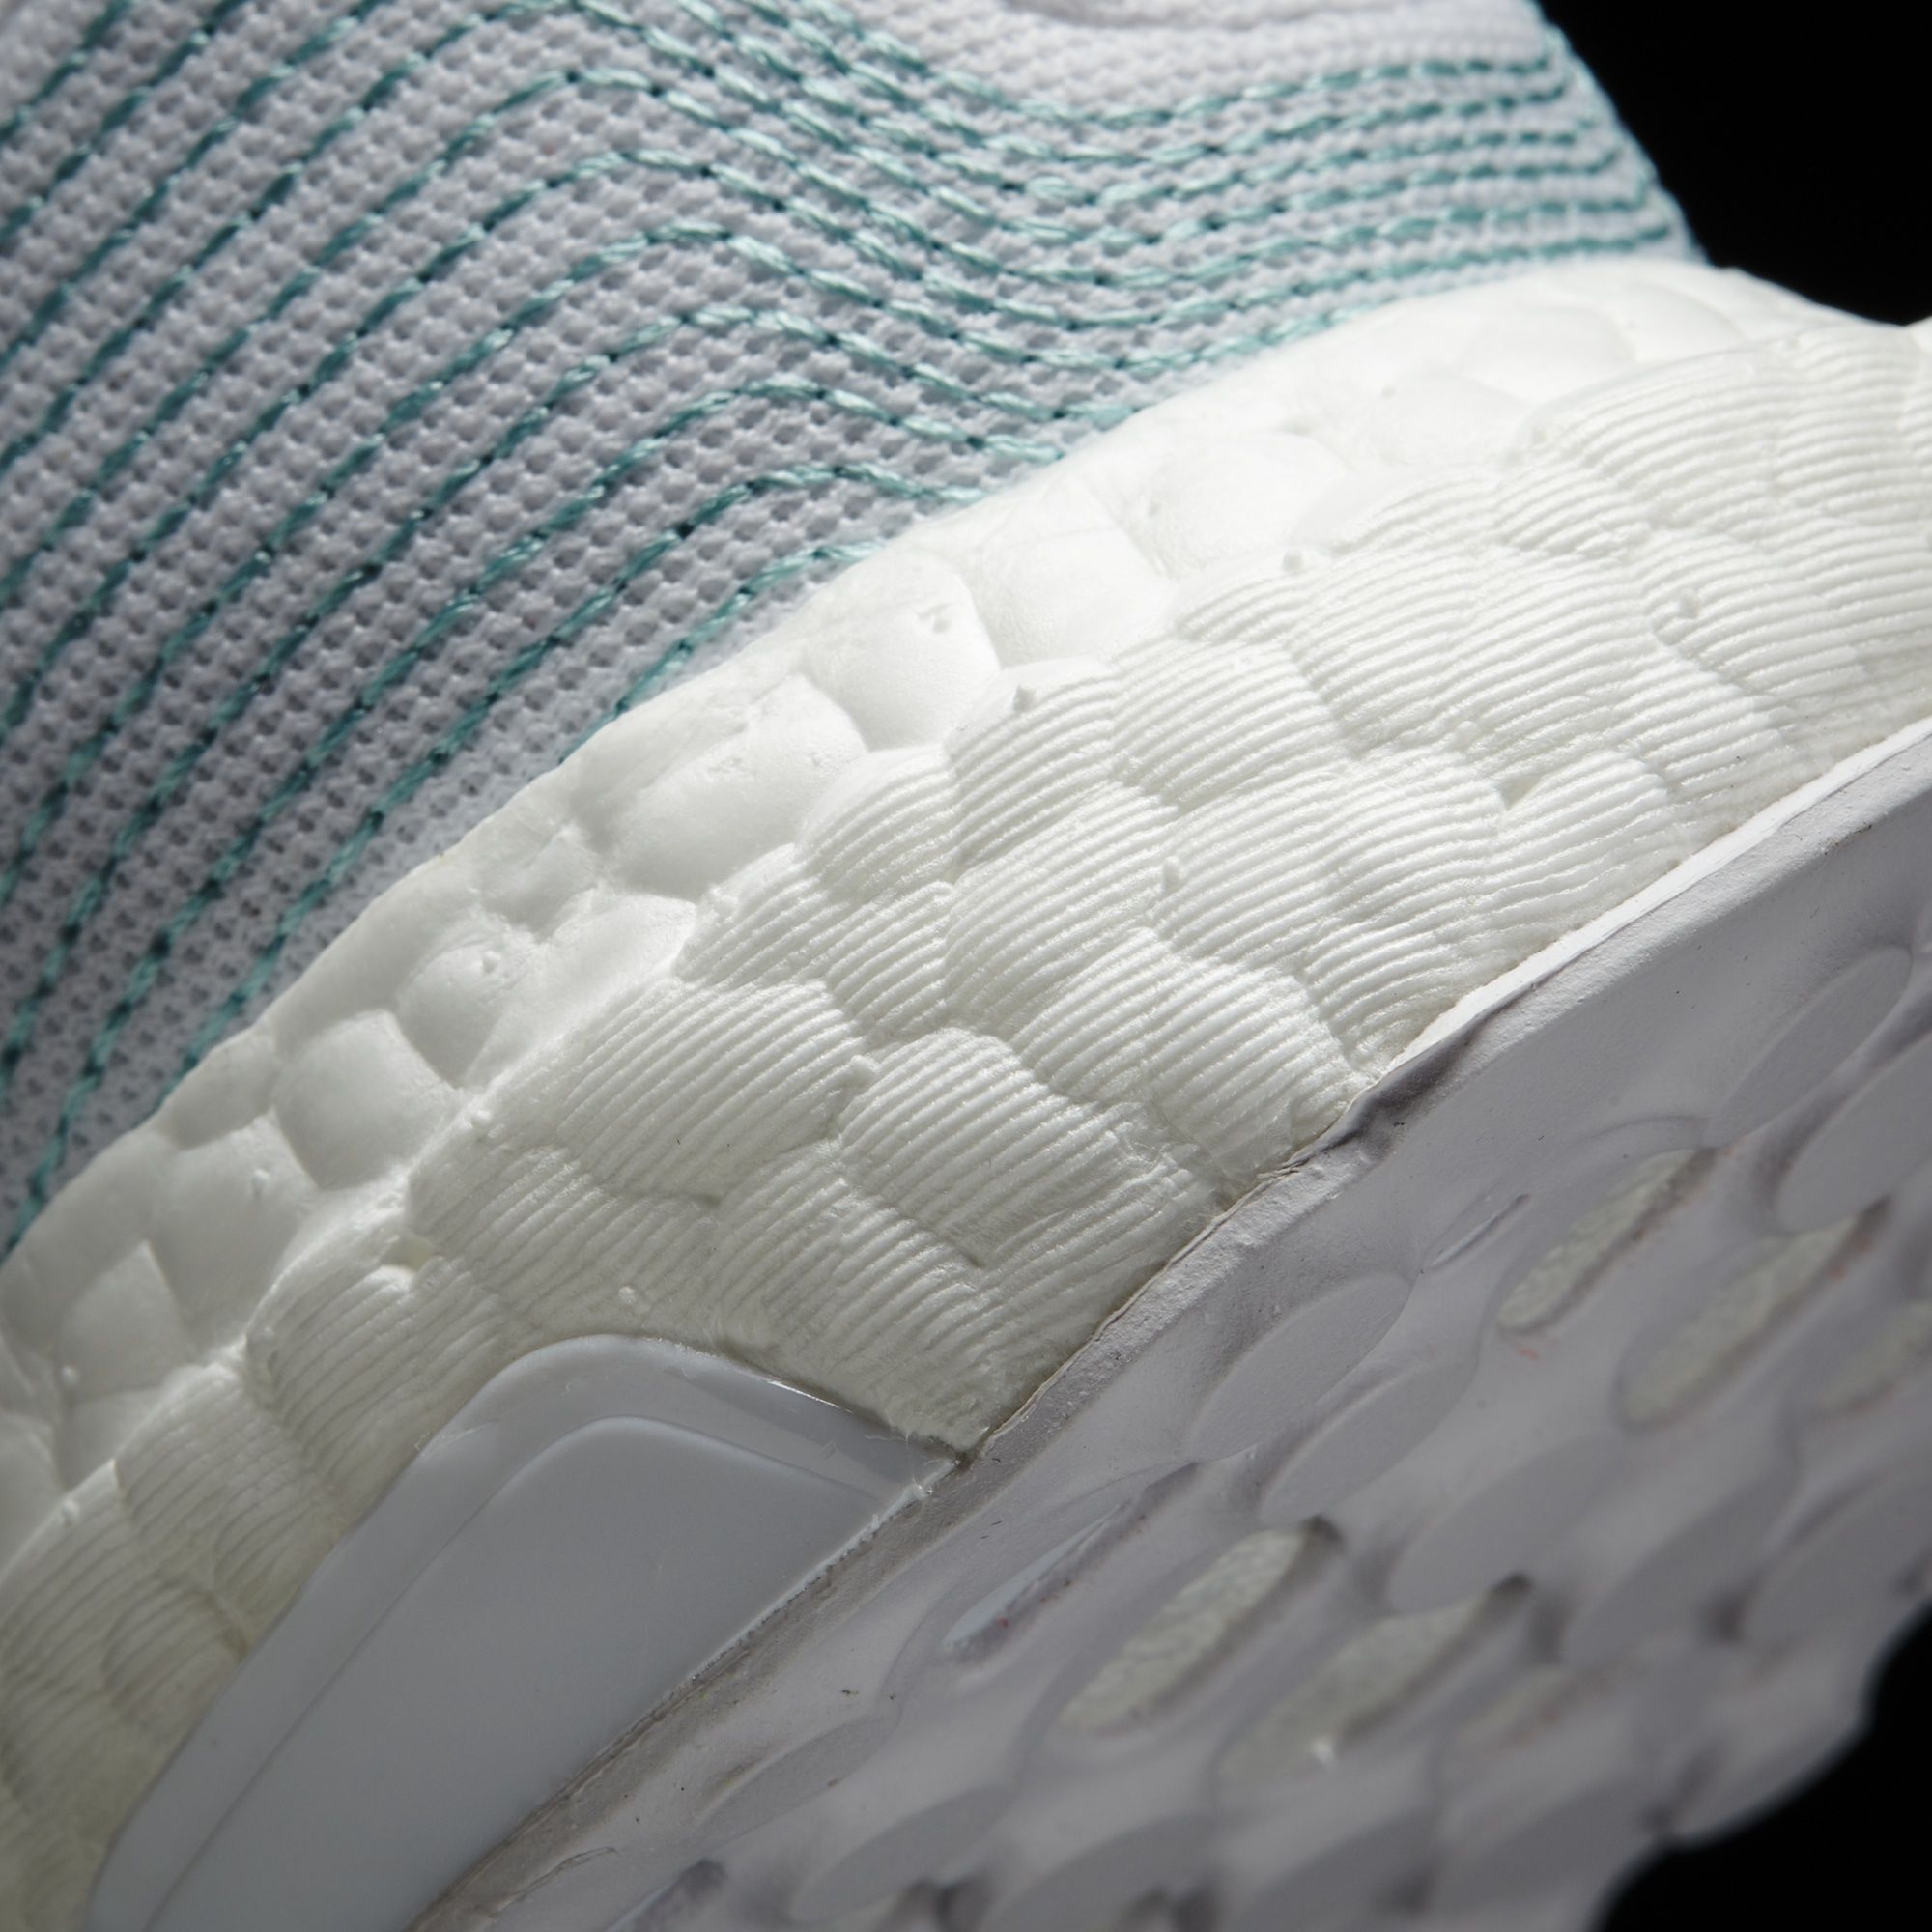 Parley Adidas Ultra Boost Uncaged Midsole Detail